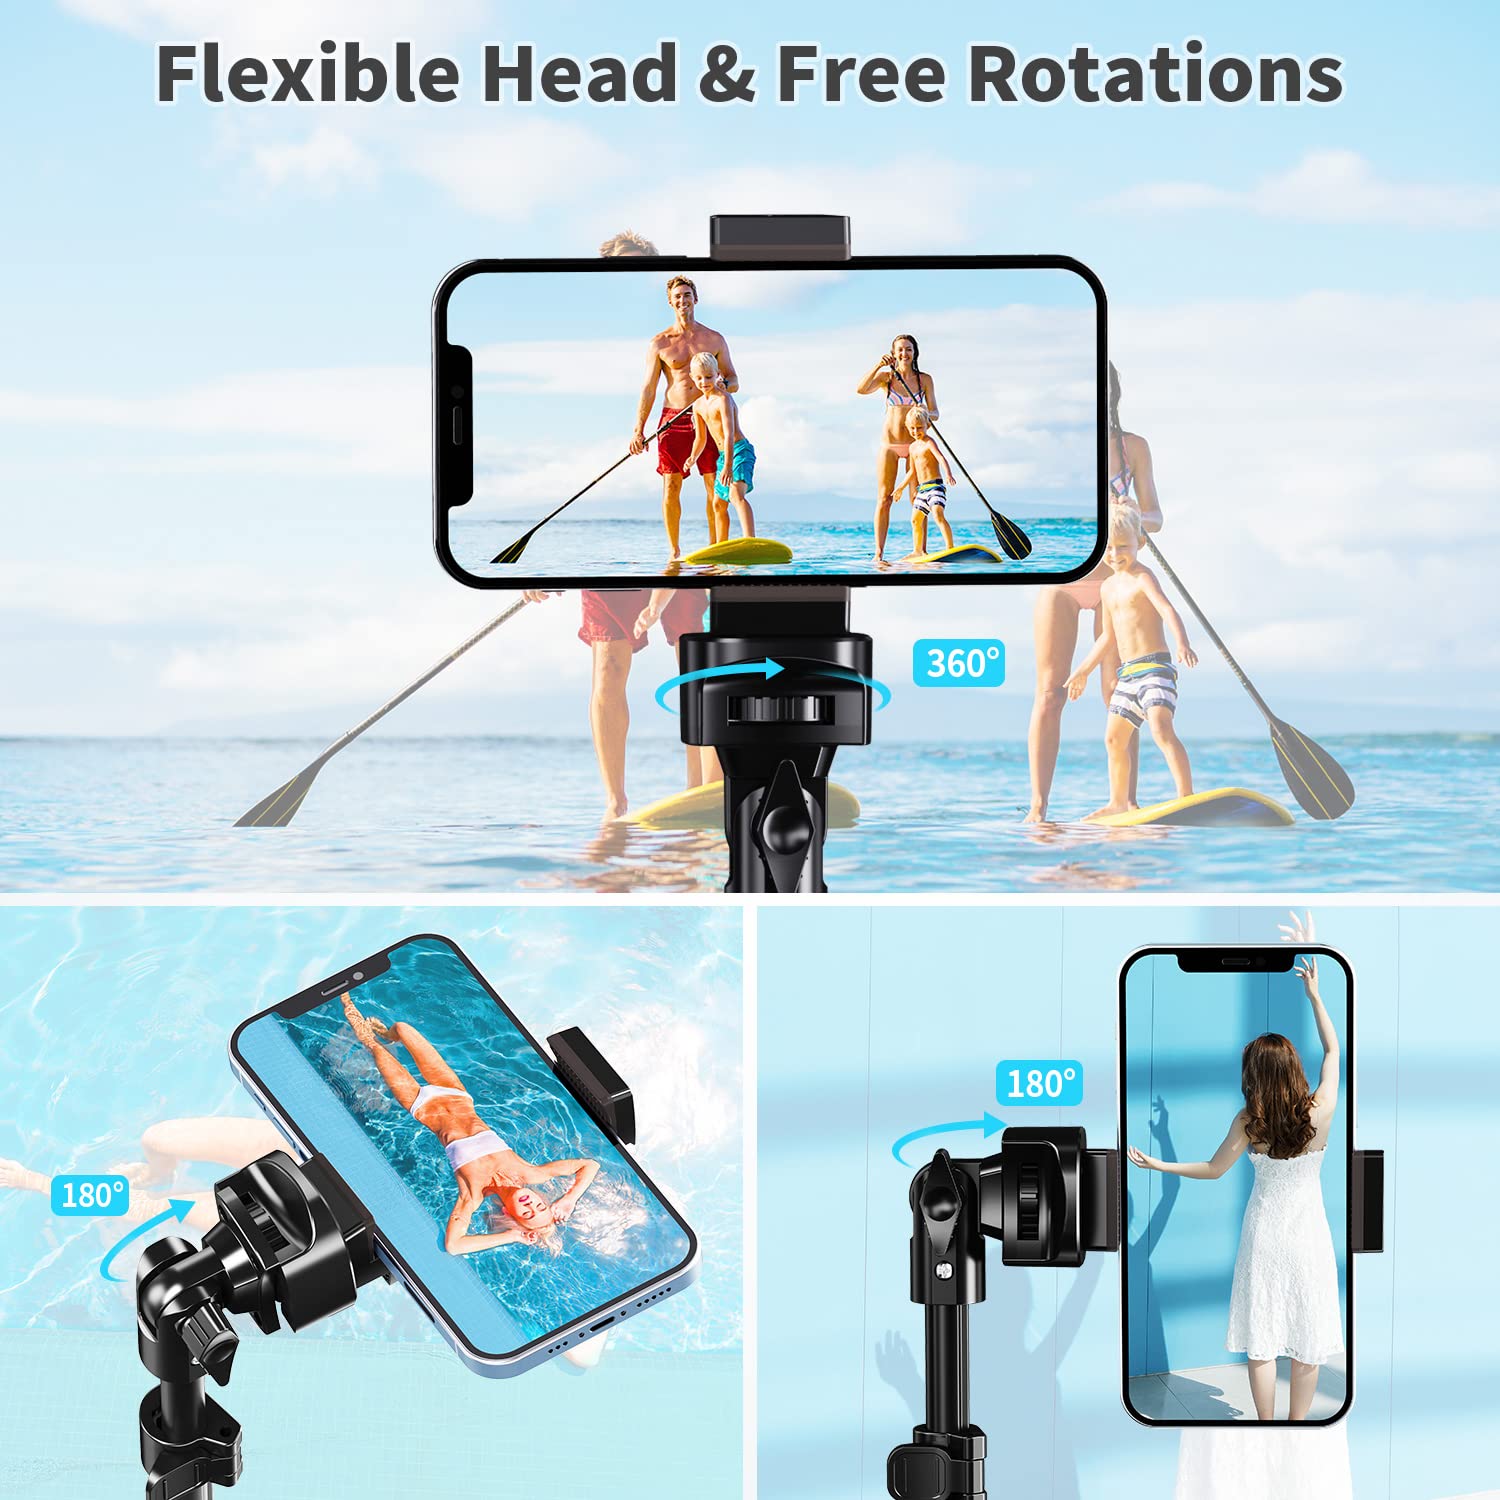 Pnitri 67'' Professional Phone Tripod Stand & Portable Aluminum Selfie Stick with Wireless Remote, Extendable Flexible Cellphone Tripod Compatible with iPhone Android Phone, DSLR Camera etc